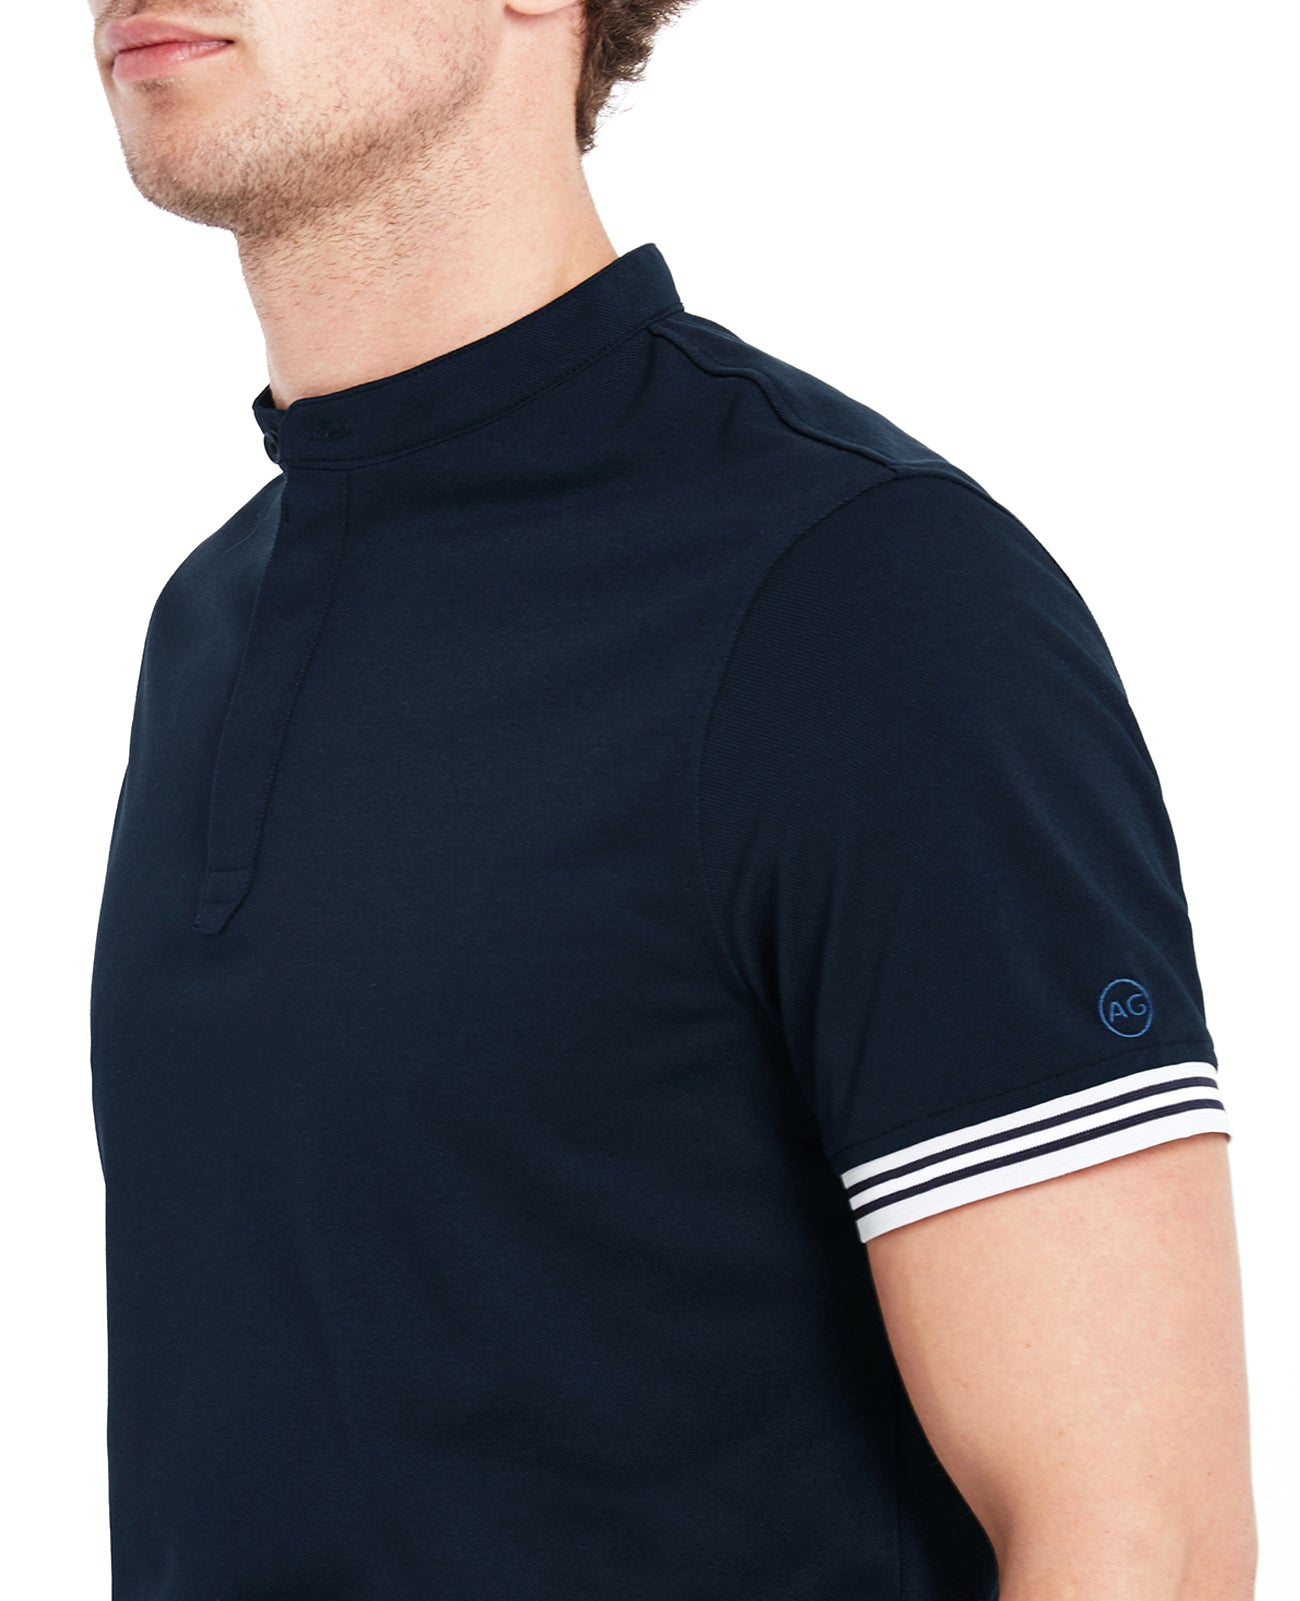 Haskett Polo Naval Blue Green Label Collection Men Tops Photo 4